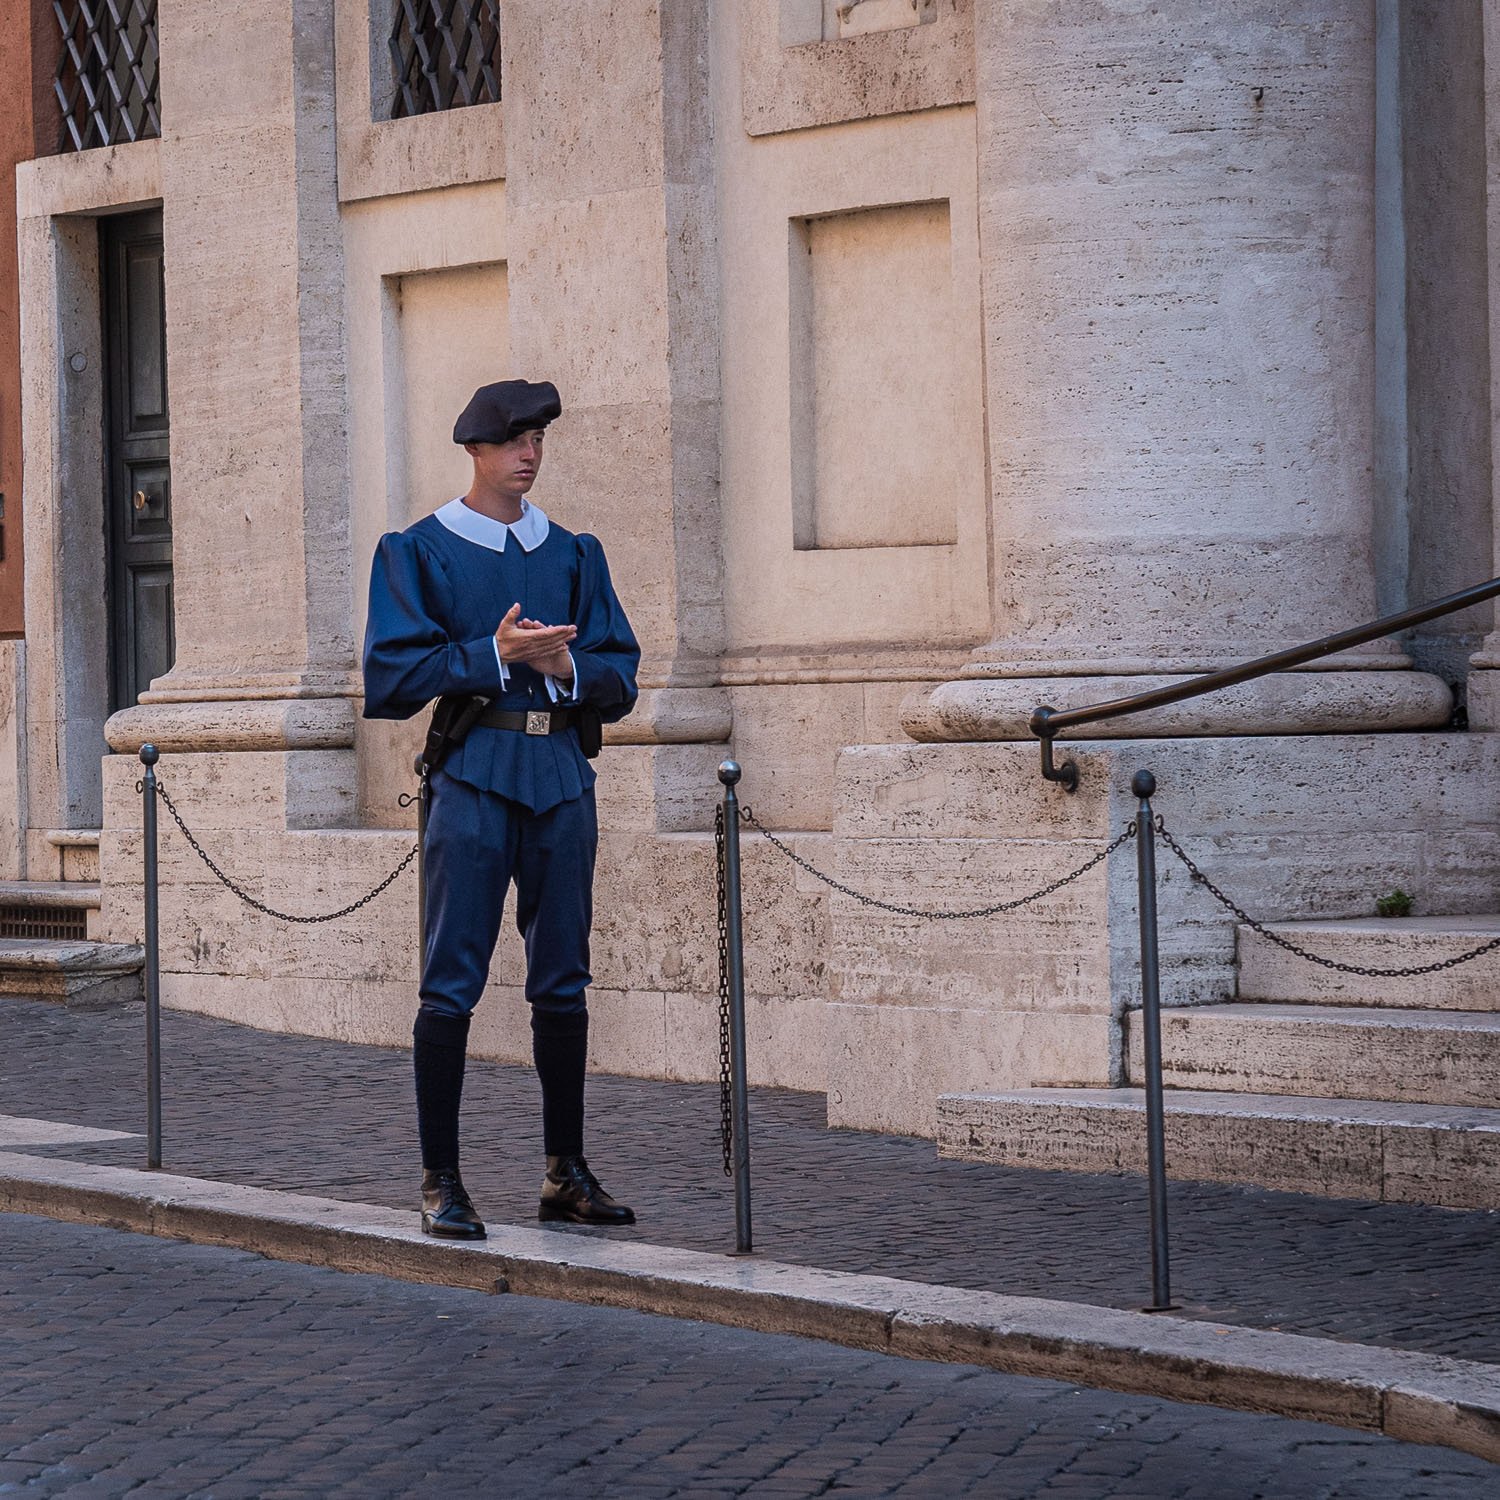 Rome Travel - Swiss Guard Protecting and Serving